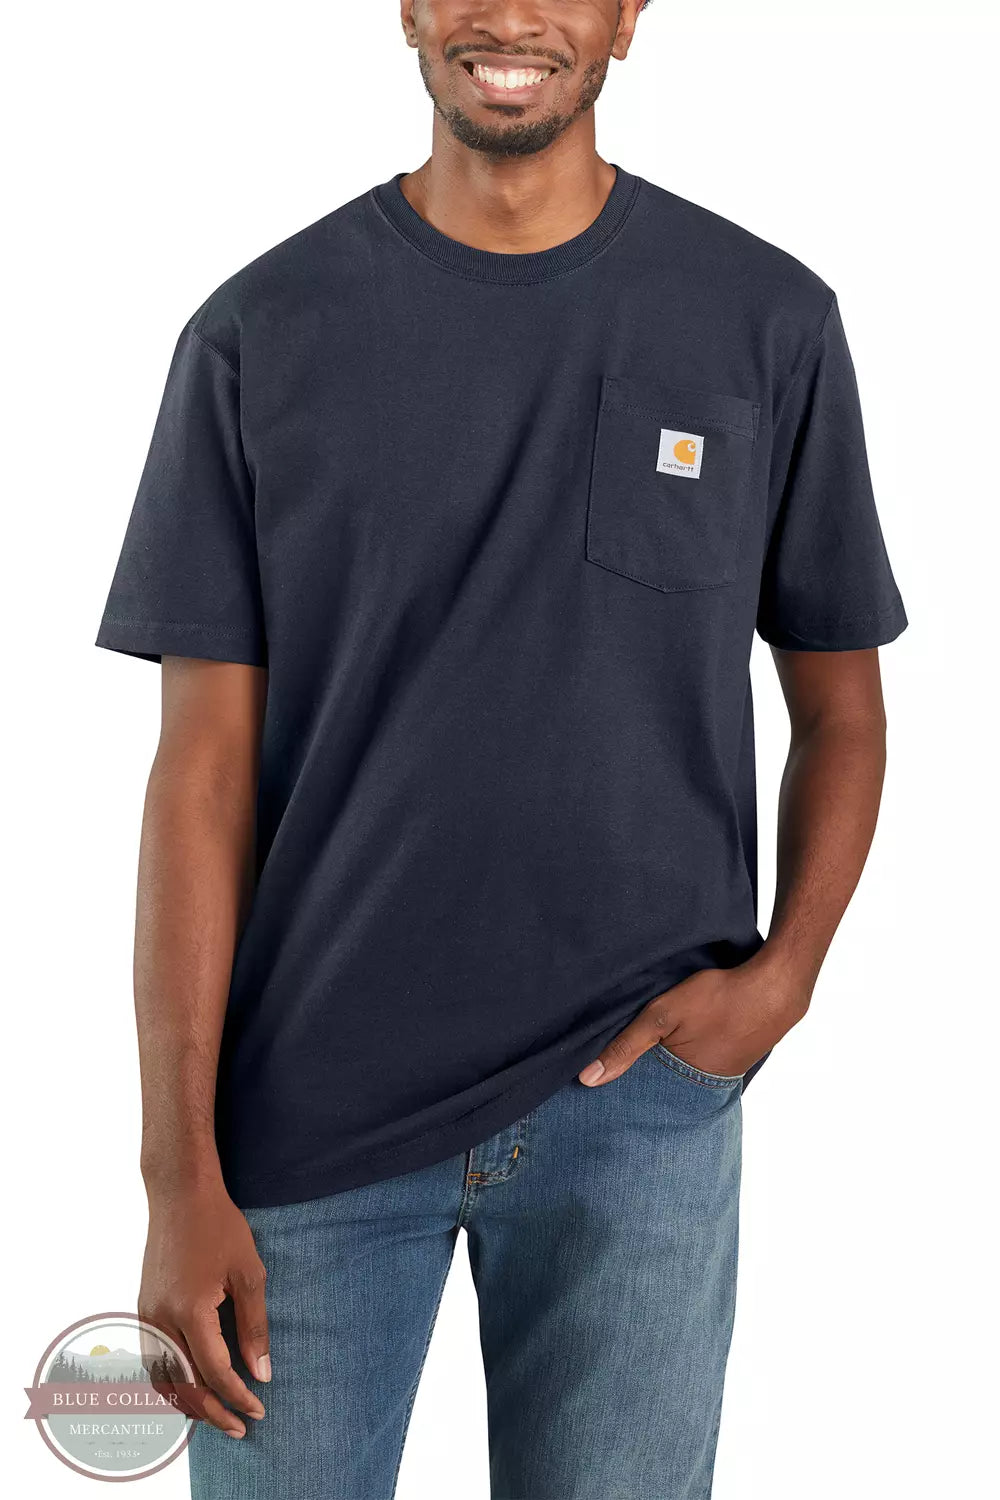 Carhartt K87 Loose Fit Heavyweight Short Sleeve Pocket T-Shirt Big and Tall Basic Colors Navy Front View